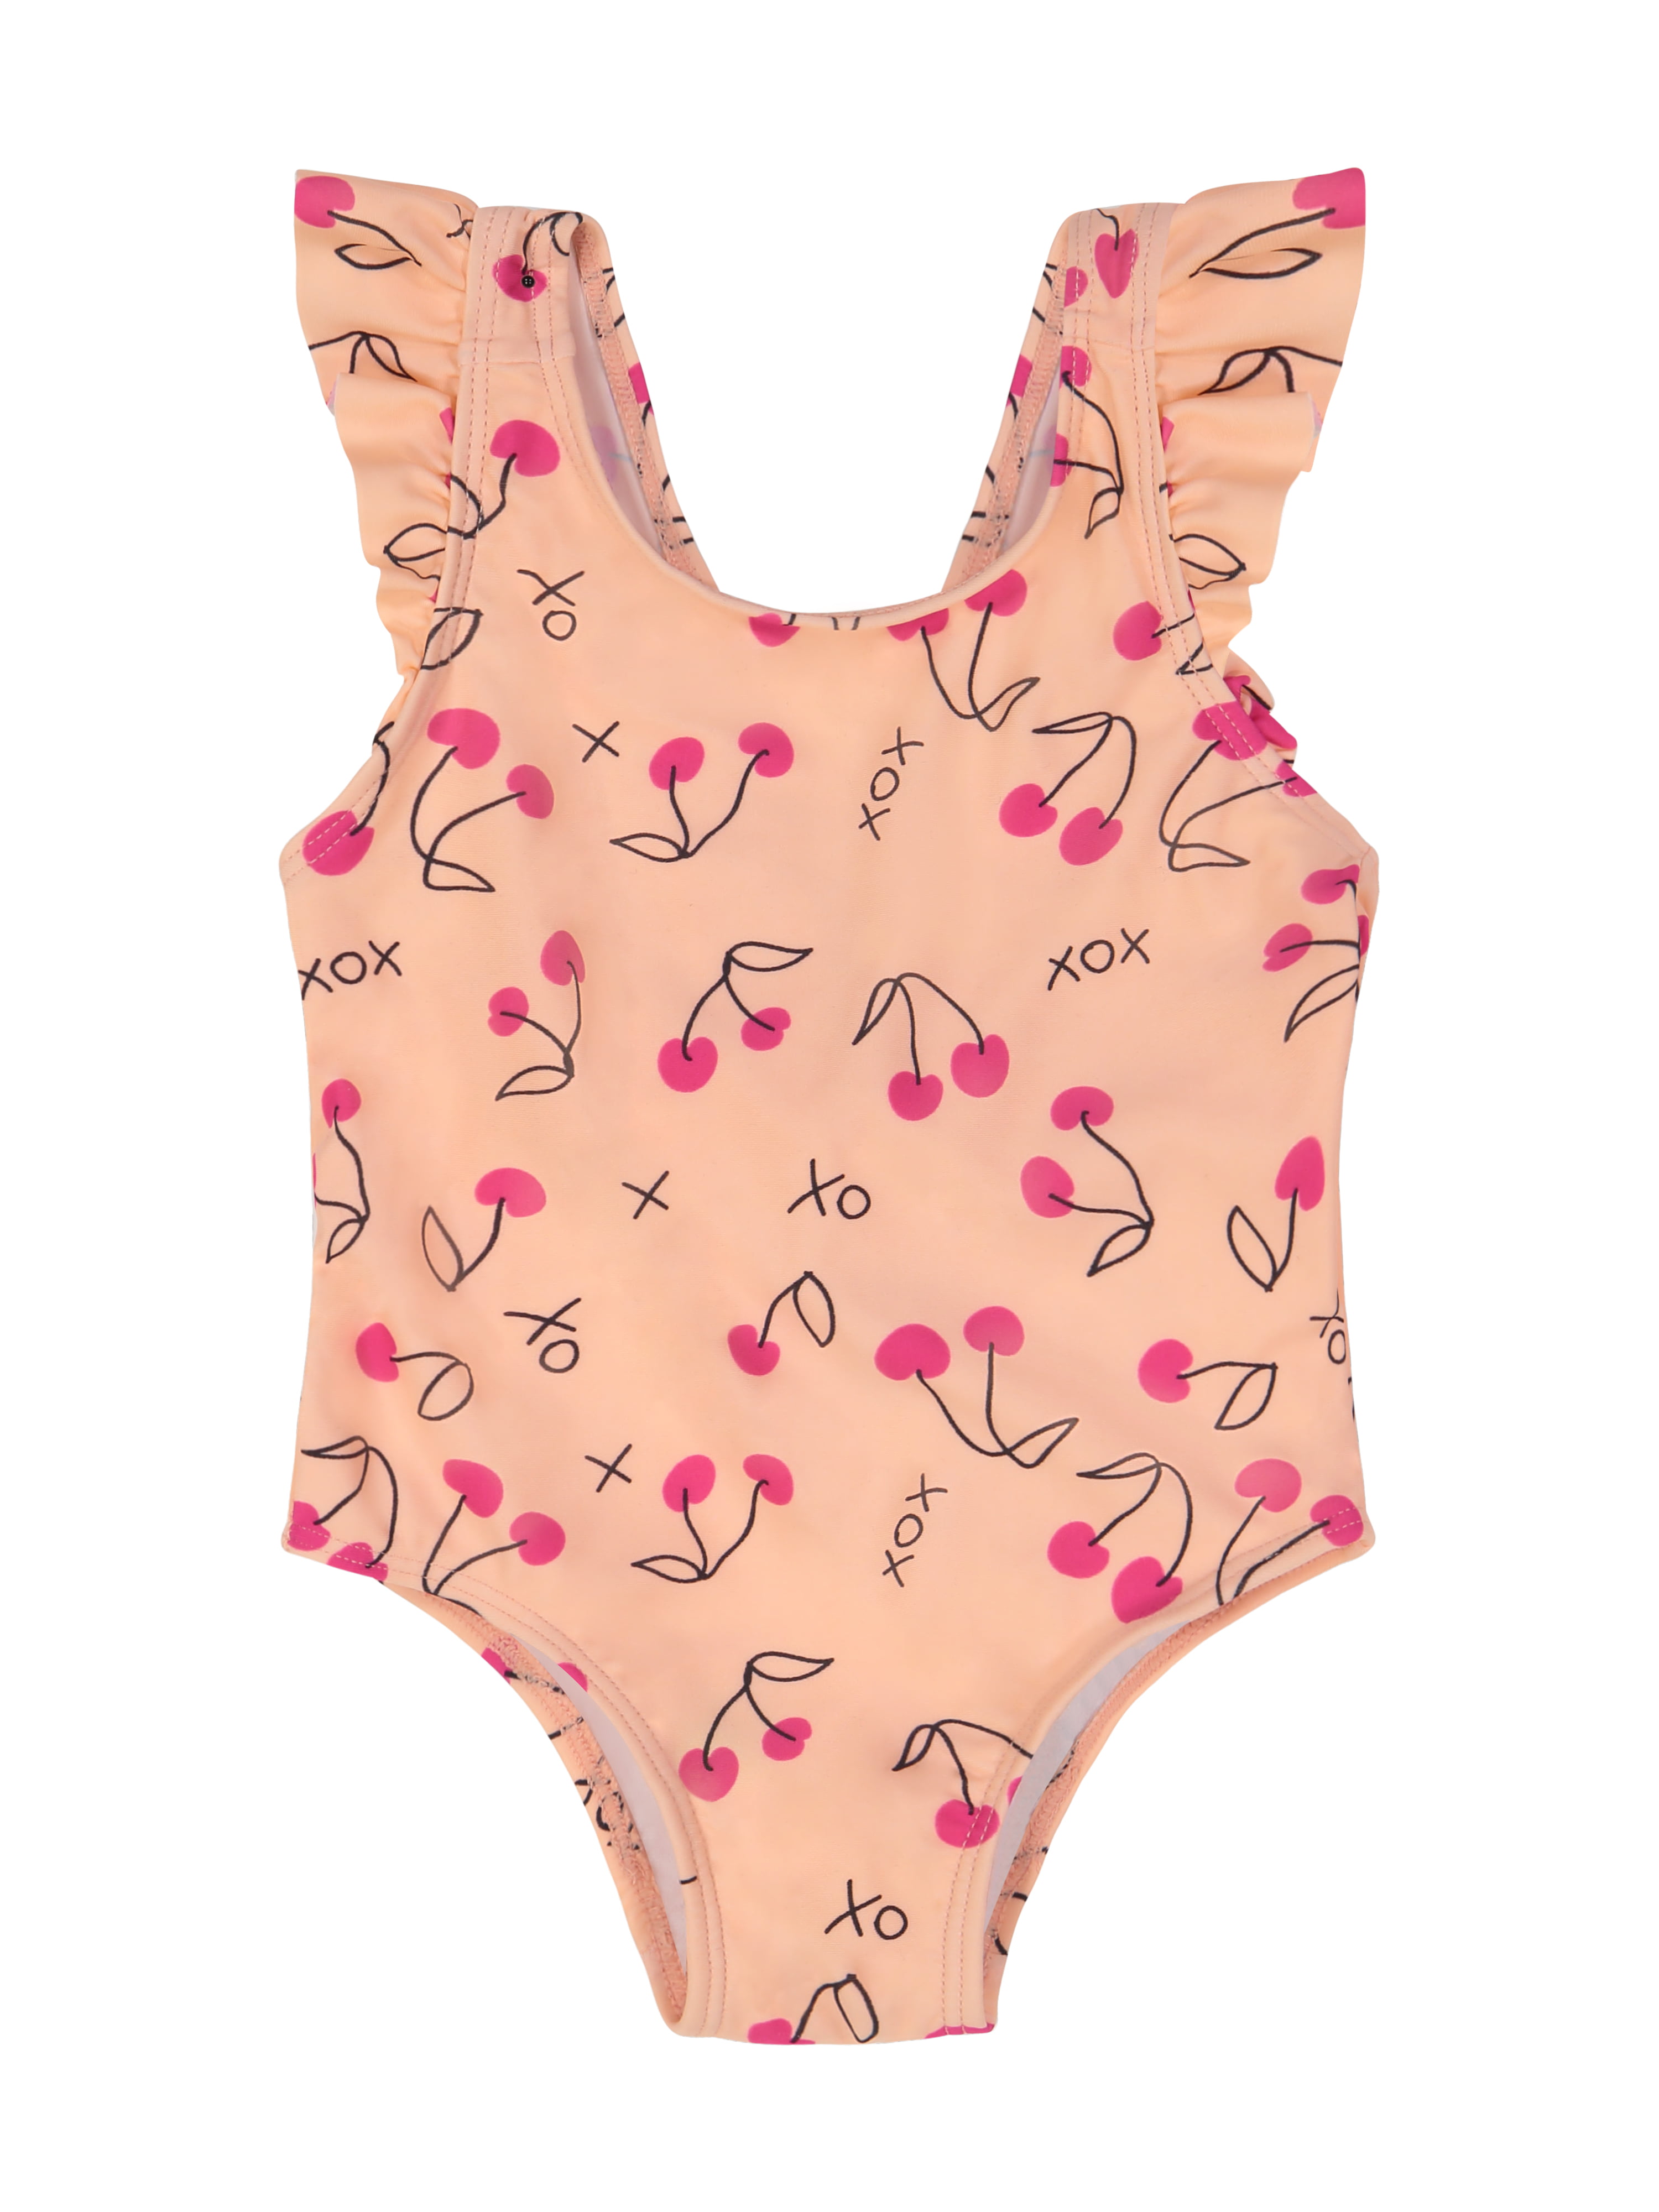 Jessica Simpson Baby Girl & Toddler Girl 1PC Bow Tied Swimsuit (12M-4T) -  Walmart.com